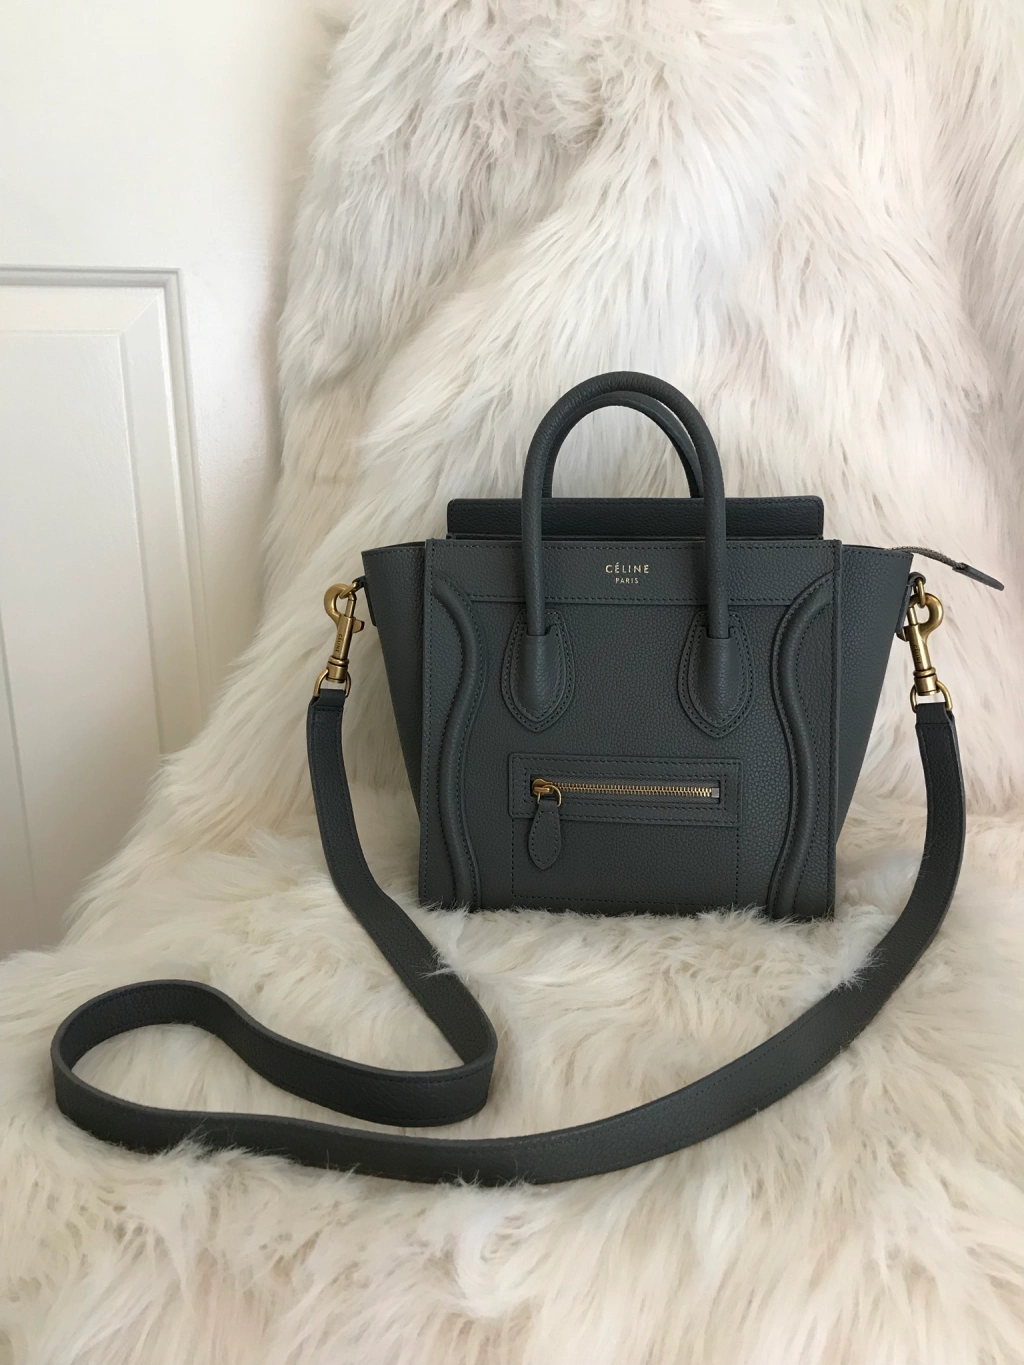 [REVIEW] Celine Nano Luggage in Kohl, Drummed Leather, Gold Hardware ...